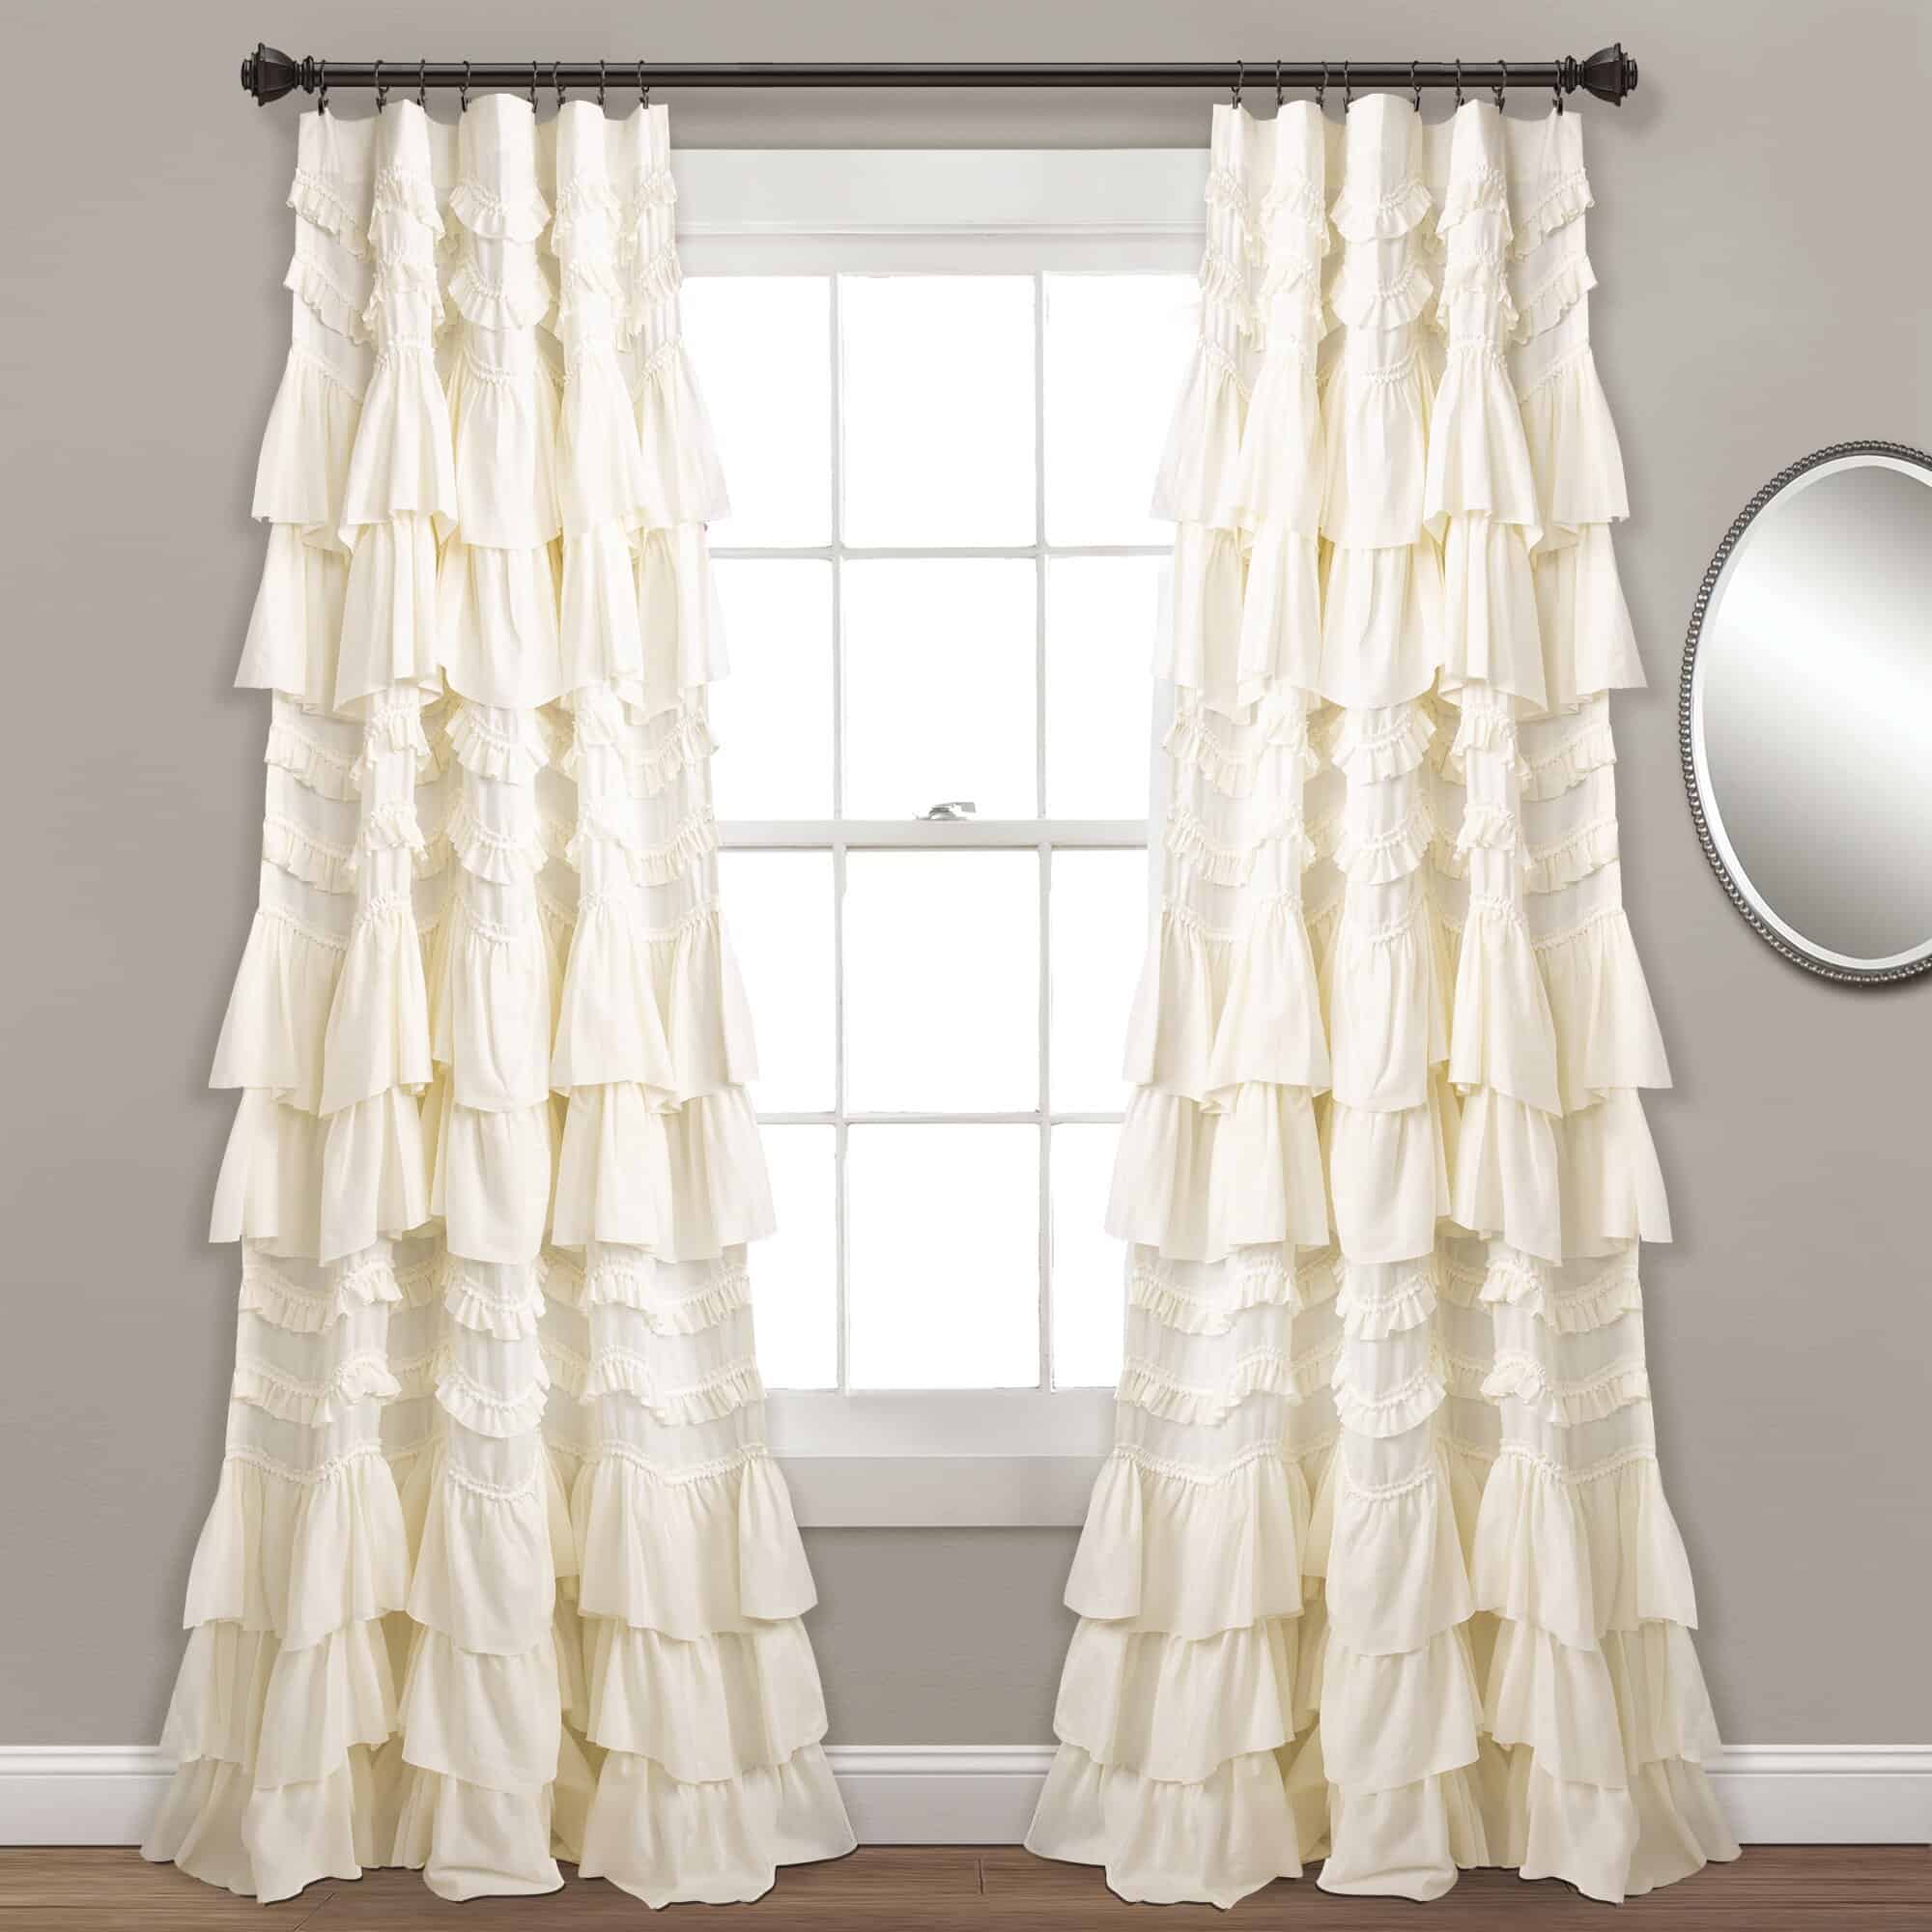 Curtains With Ruffles Add a Dash of Royalty